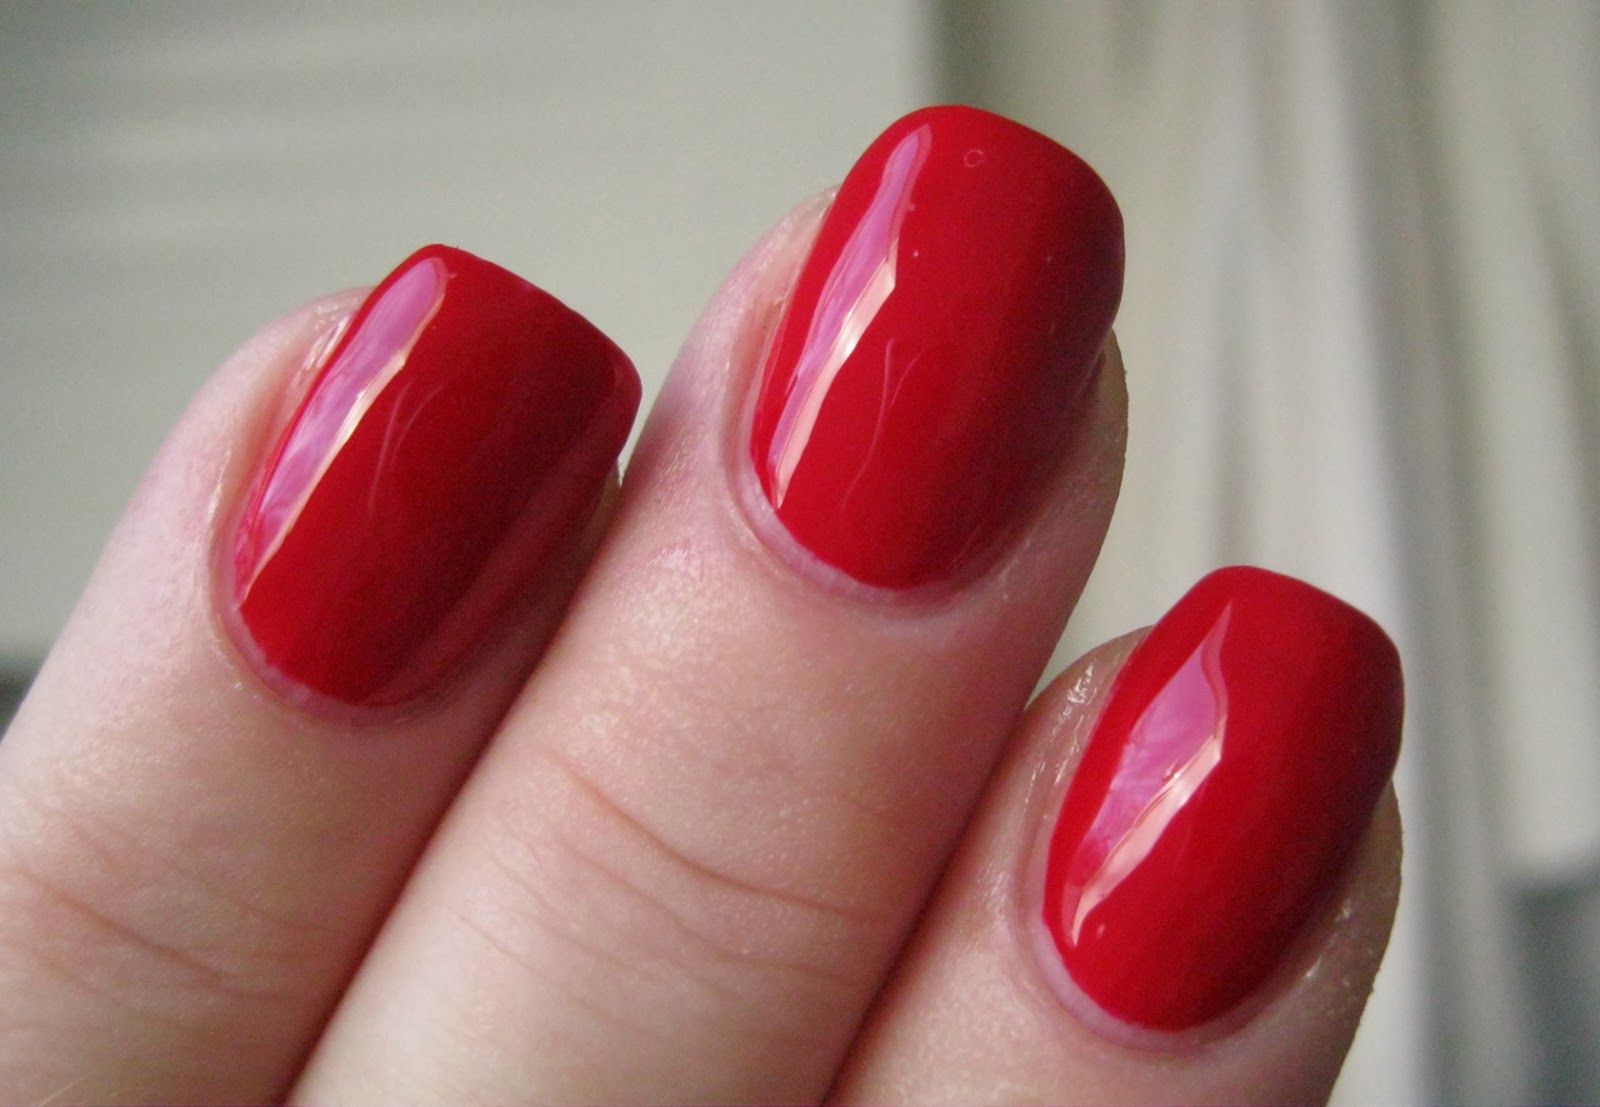 5. "Butter London Come to Bed Red" - wide 7